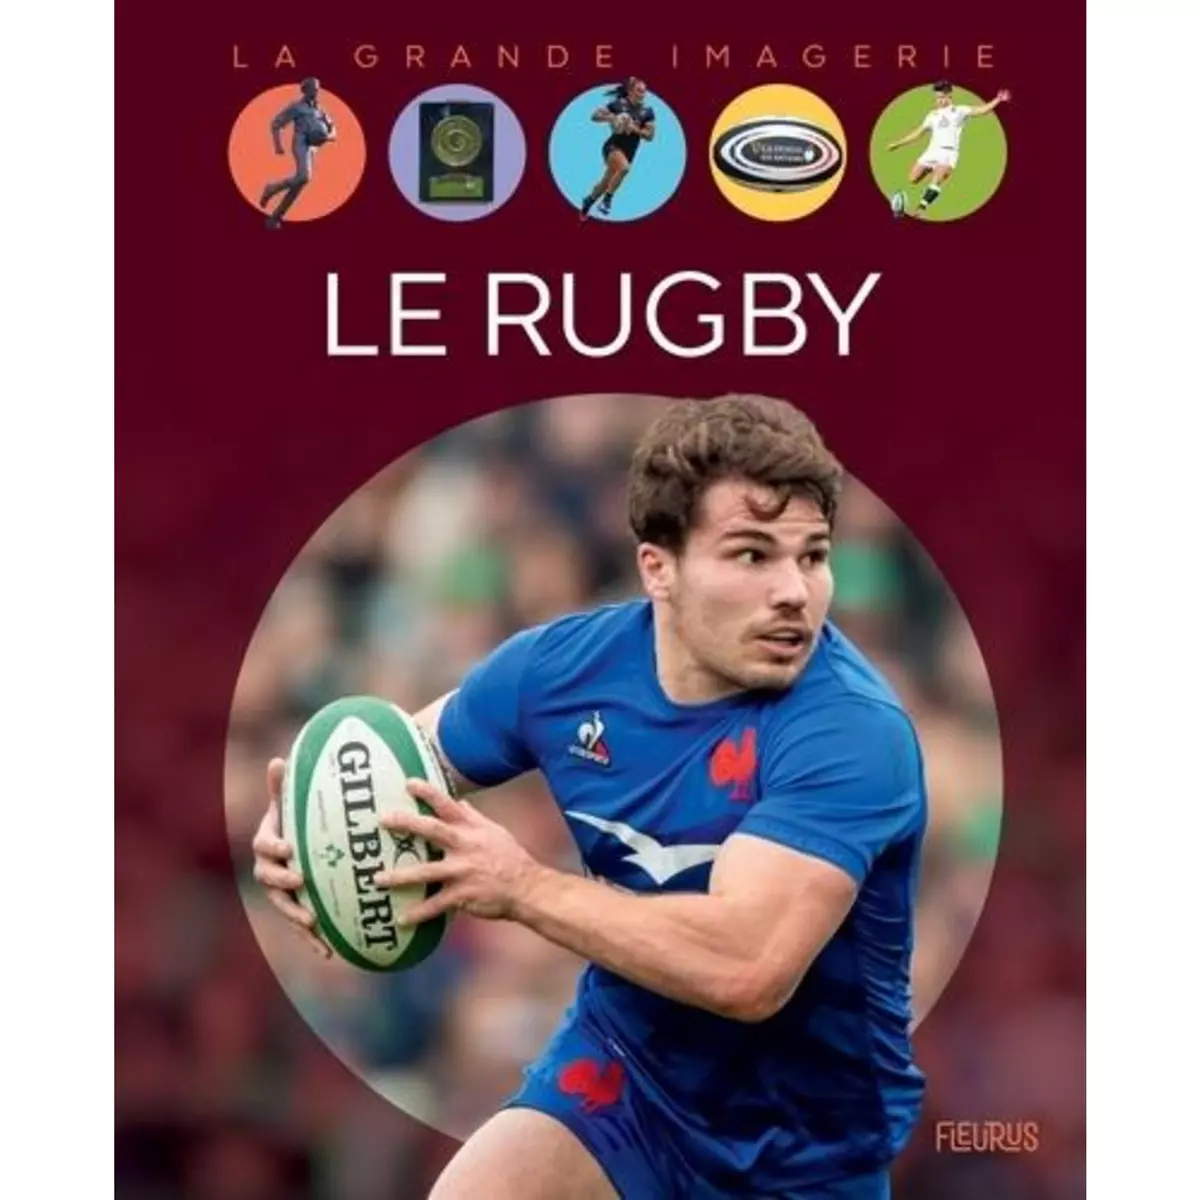  LE RUGBY, Jeanson Aymeric